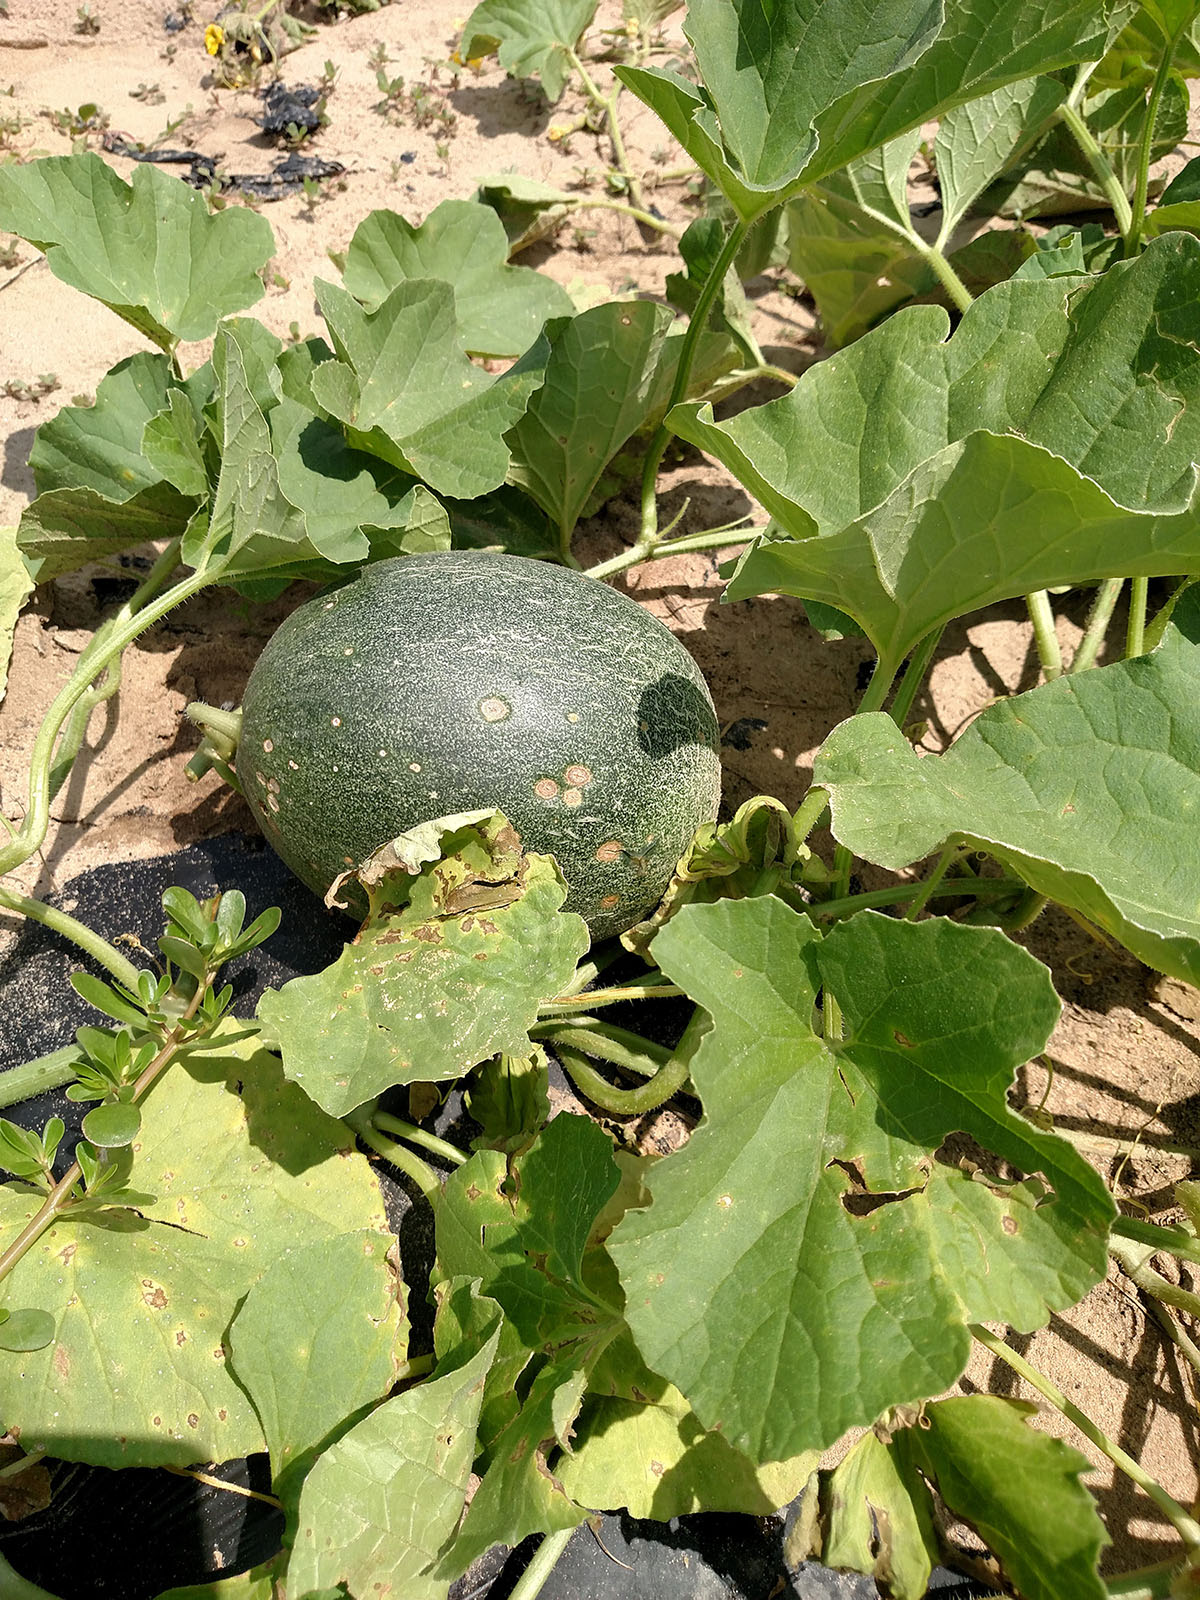 Anthracnose lesions on muskmelon